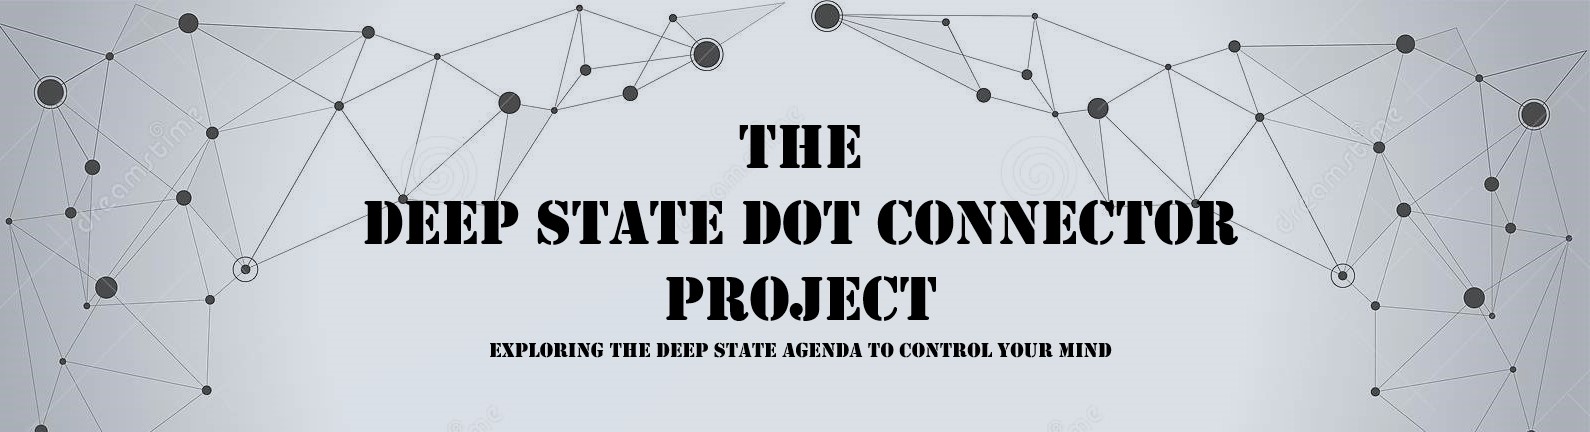 Deep State Dot Connector